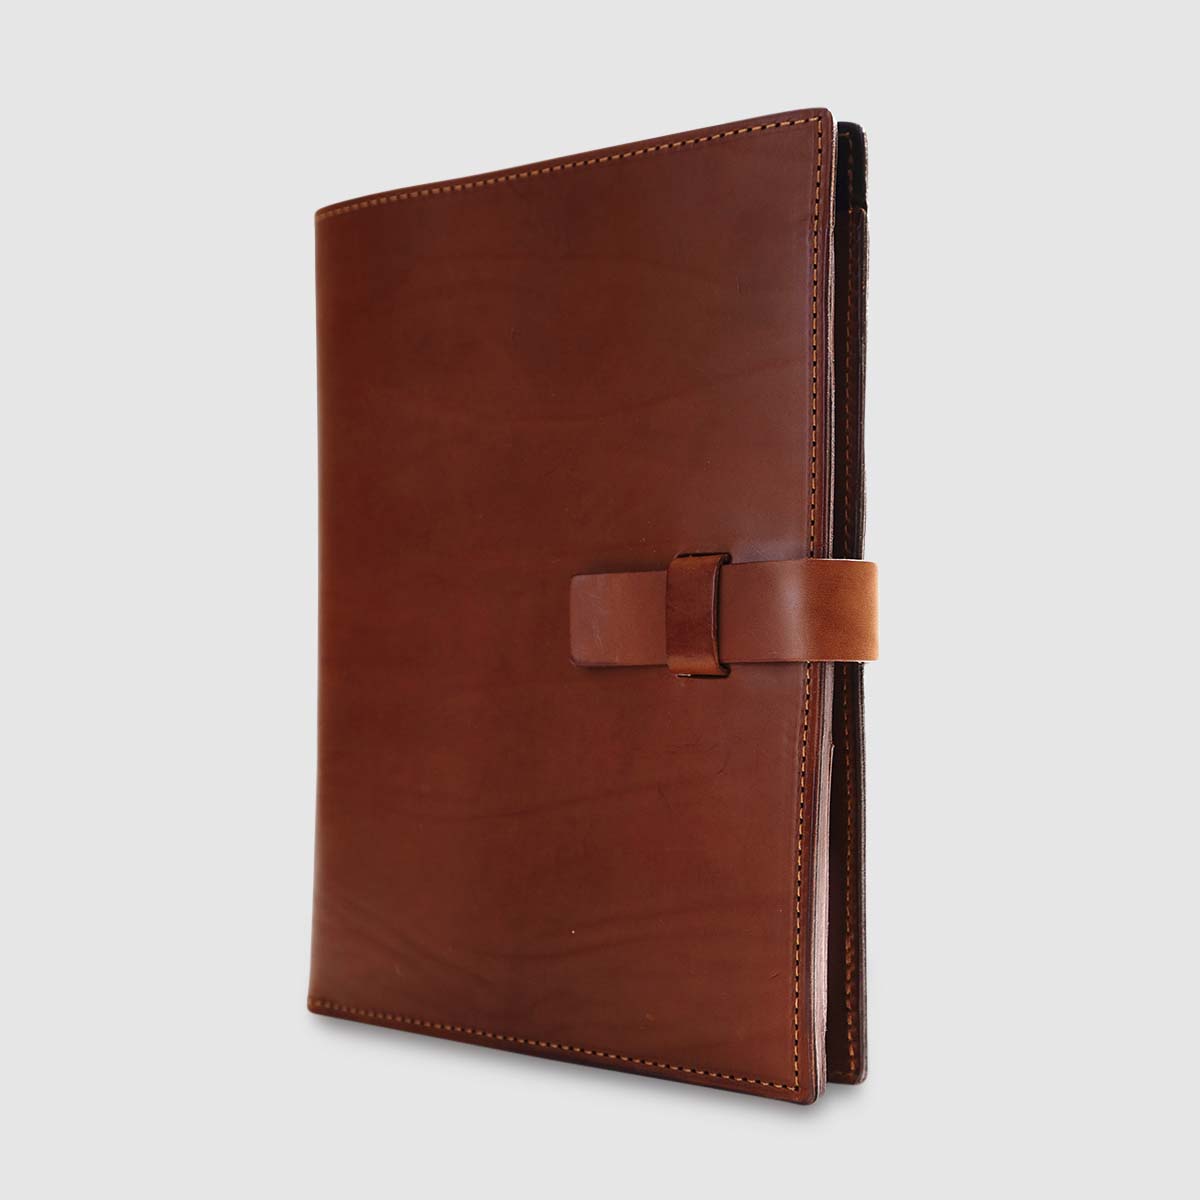 The Dust Company Pointe Leather Folio